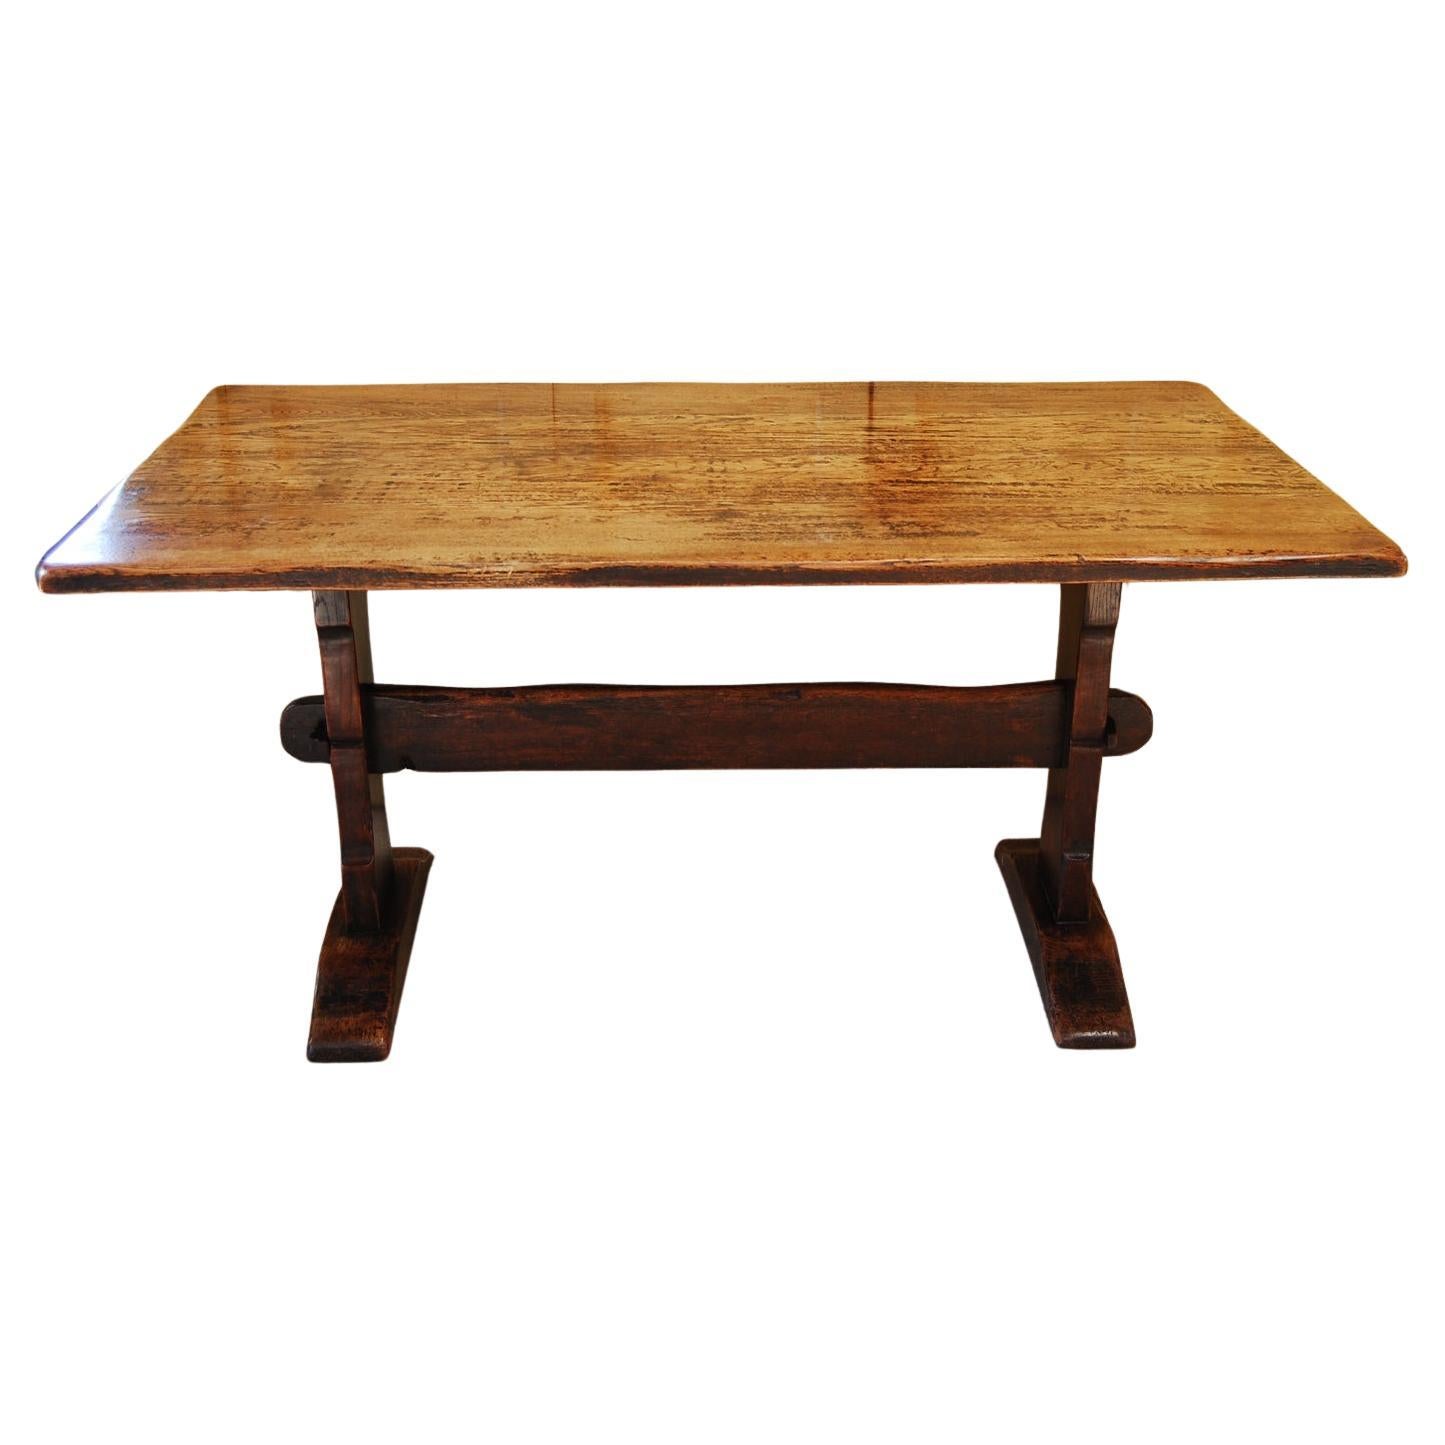 English Arts and Crafts Oak Farmhouse Table with Trestle Base and Plank Top For Sale